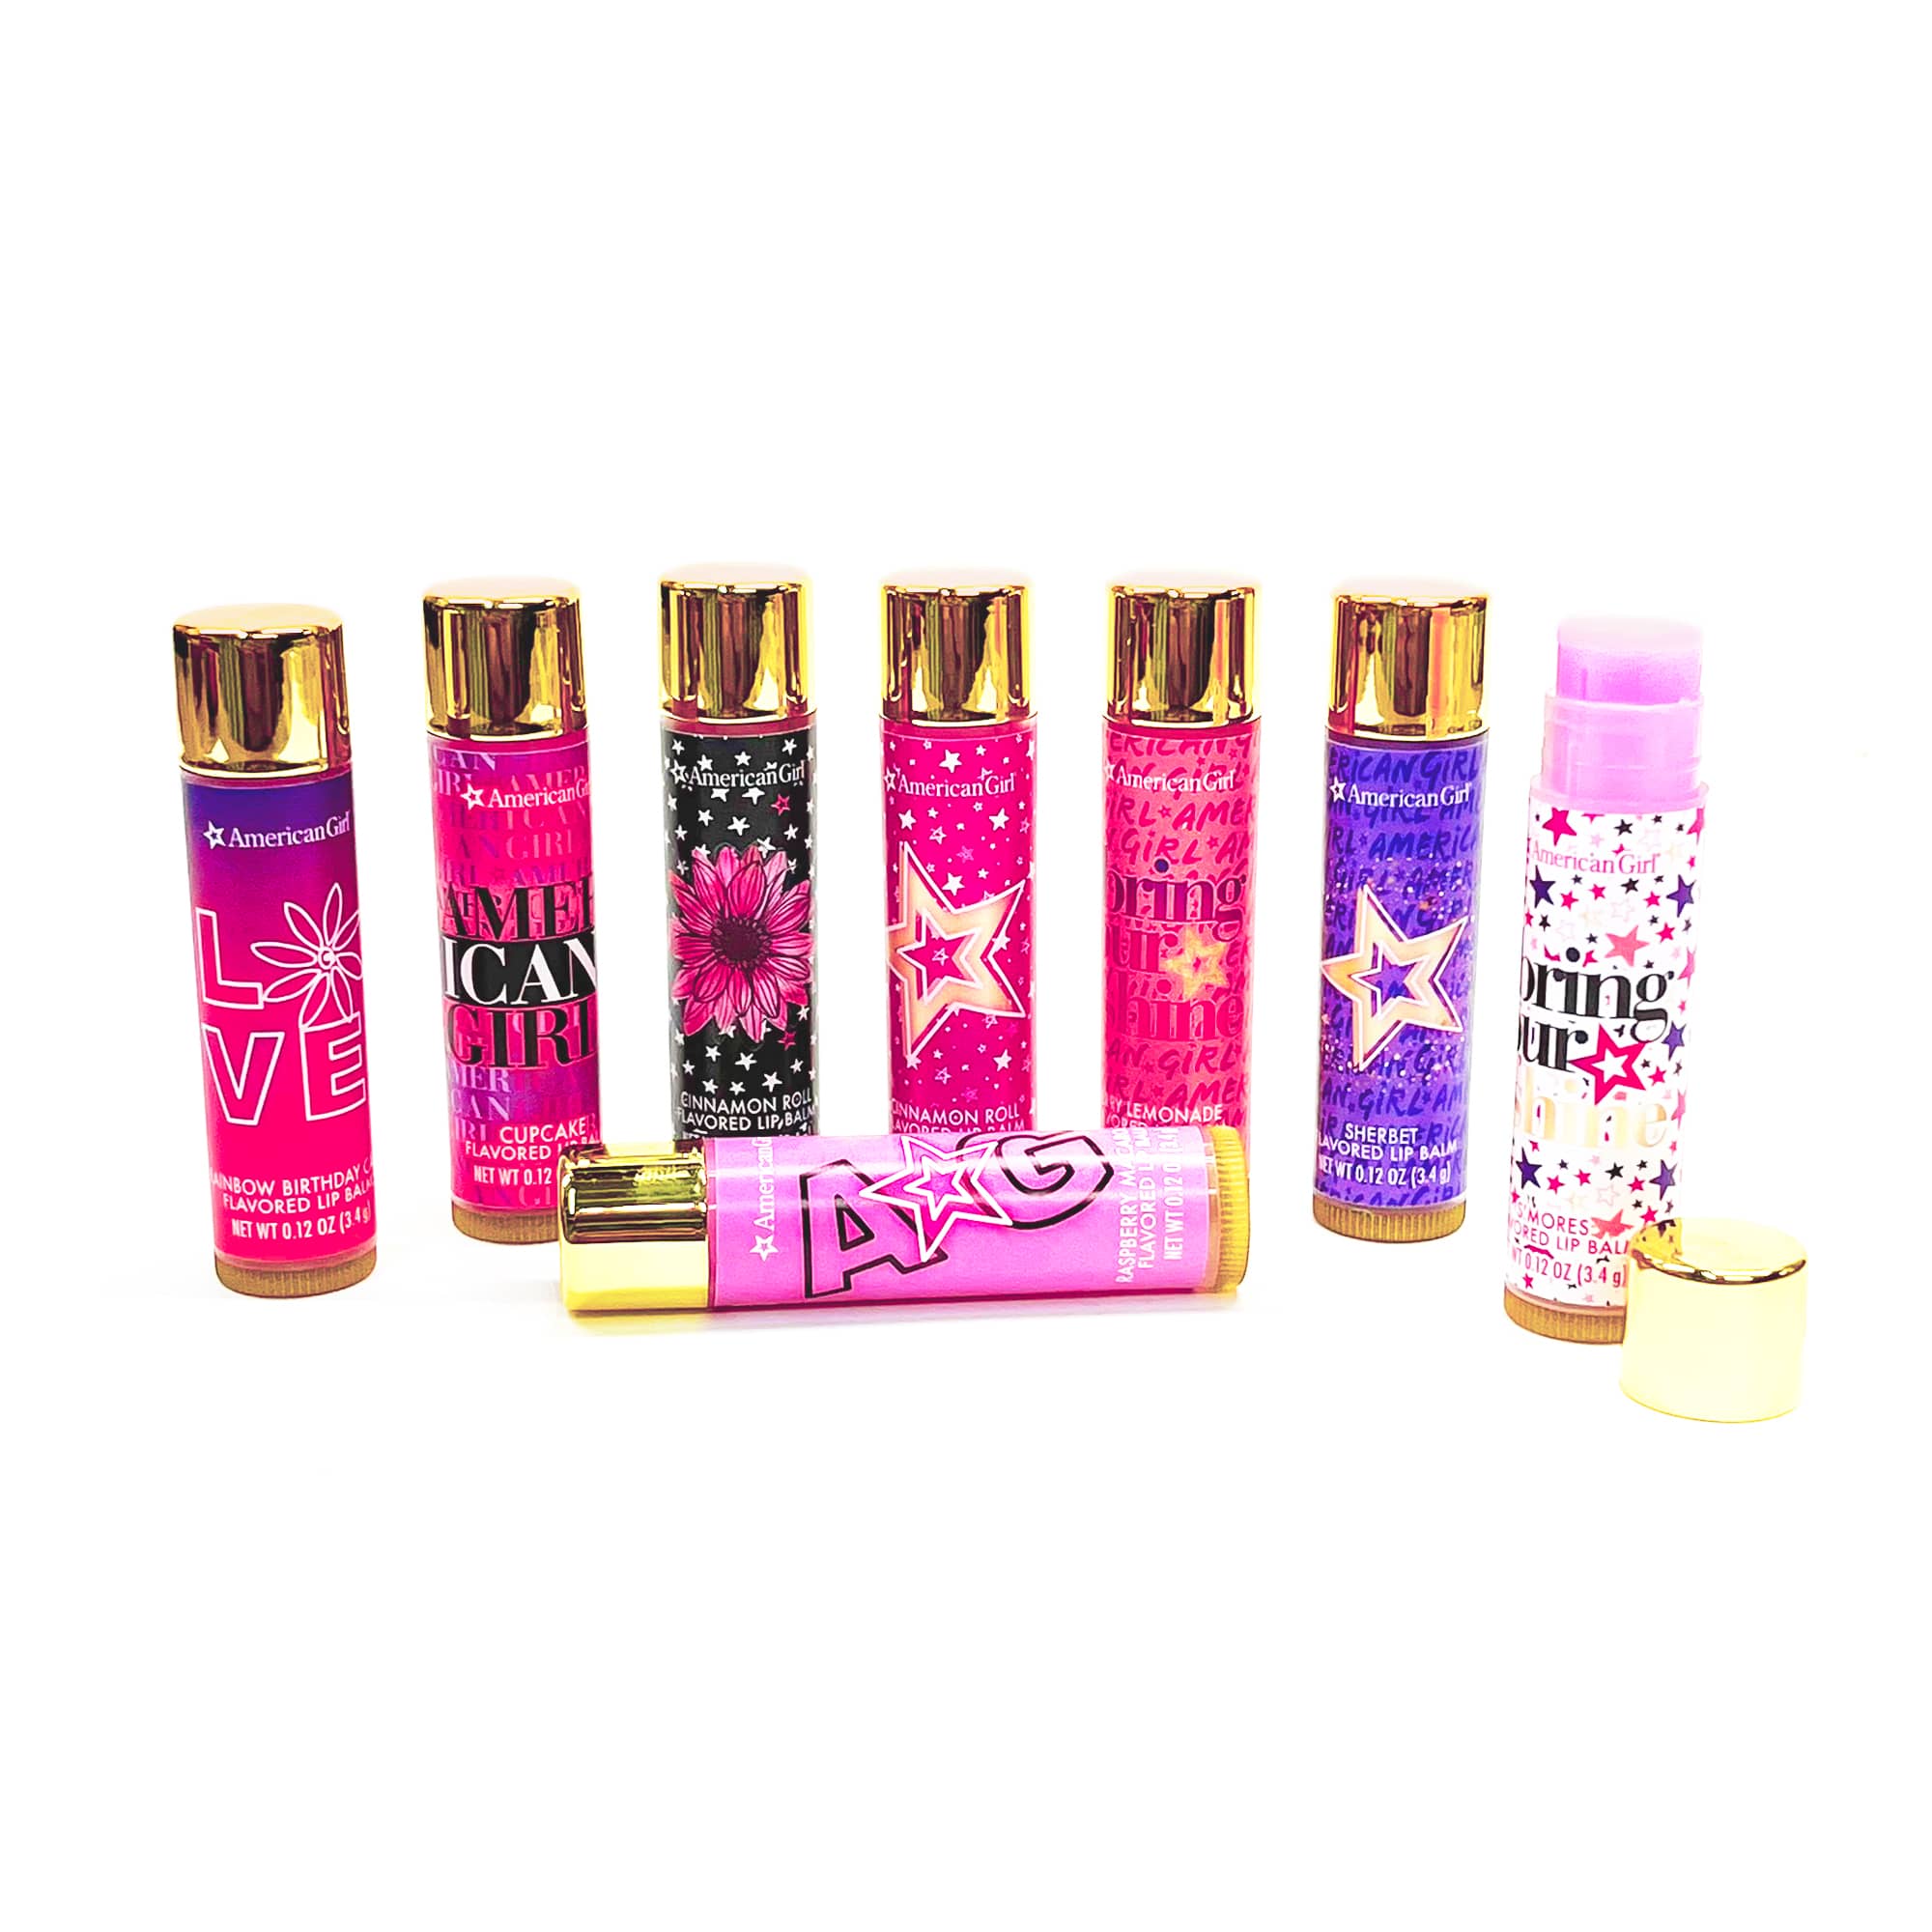 Fave Flaves Lip Balm Set for Girls